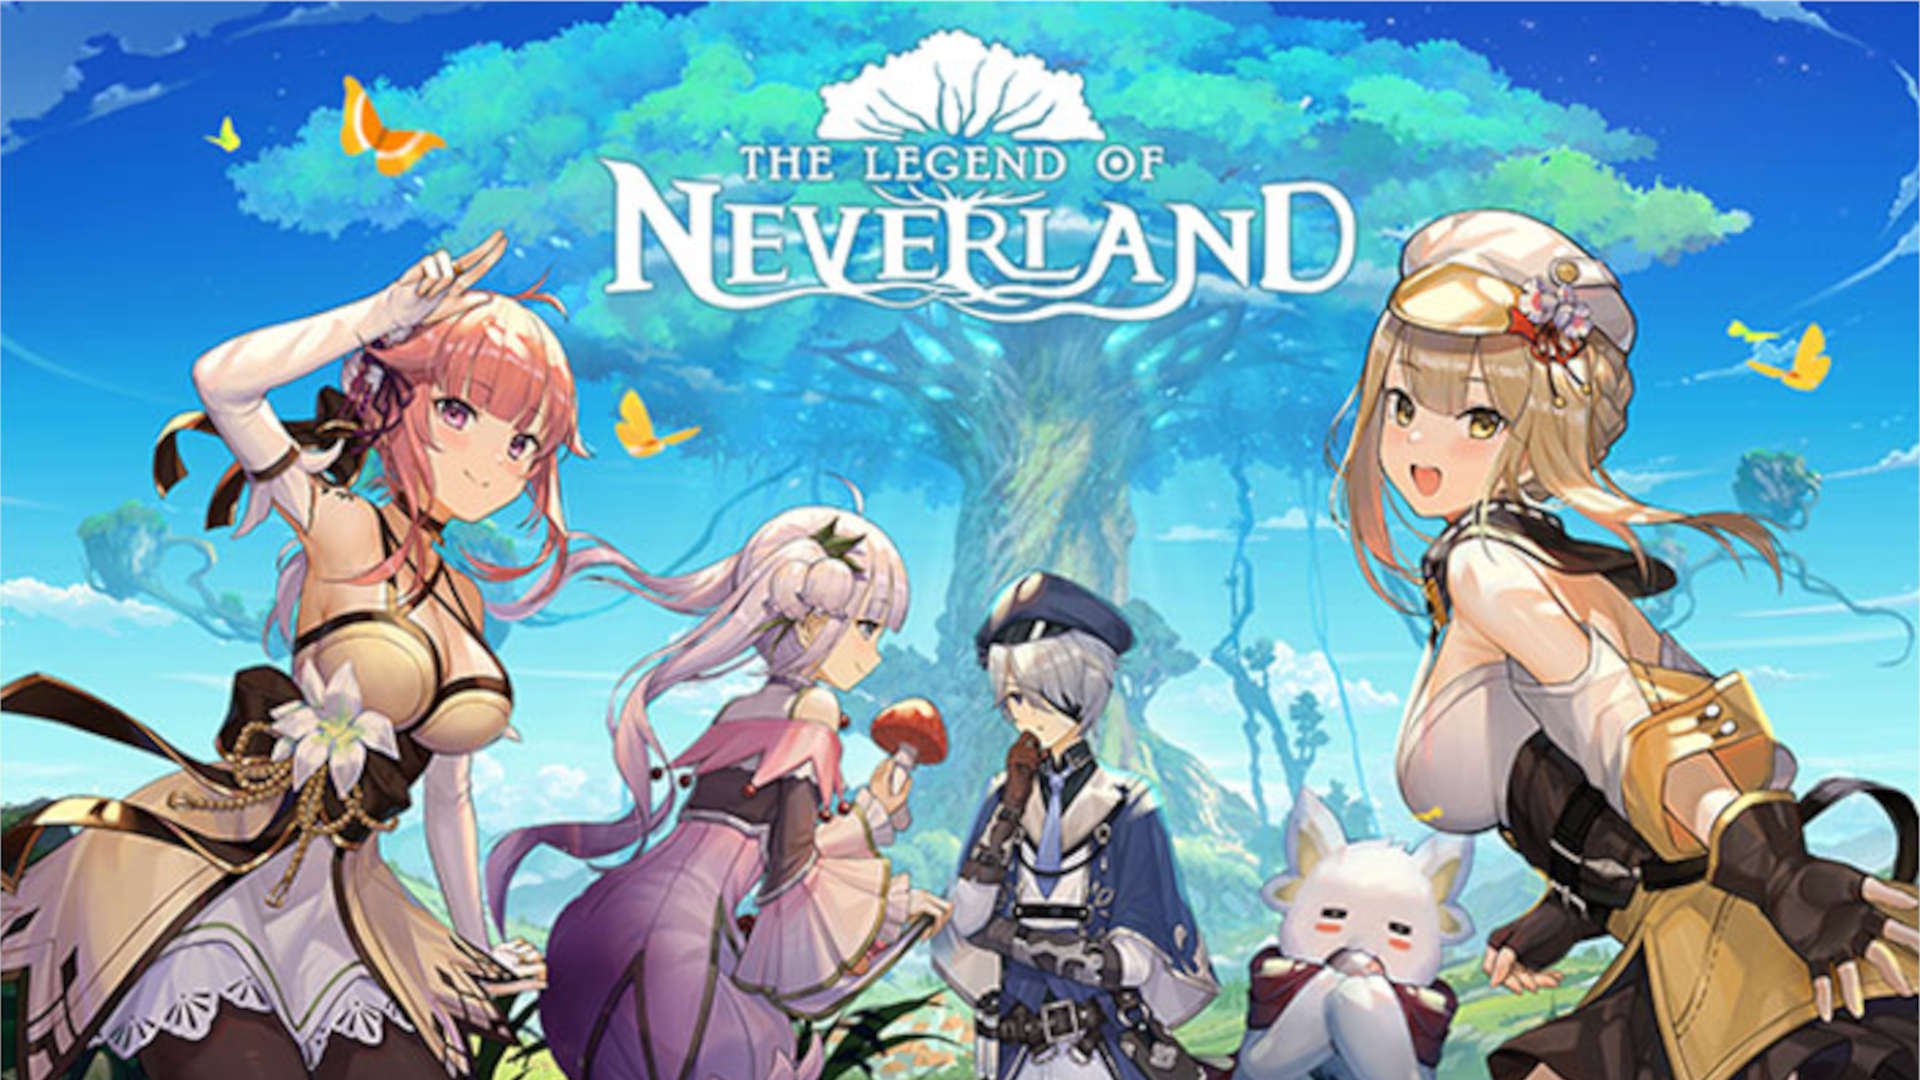 The Legend of Neverland Classes – Which is Best?